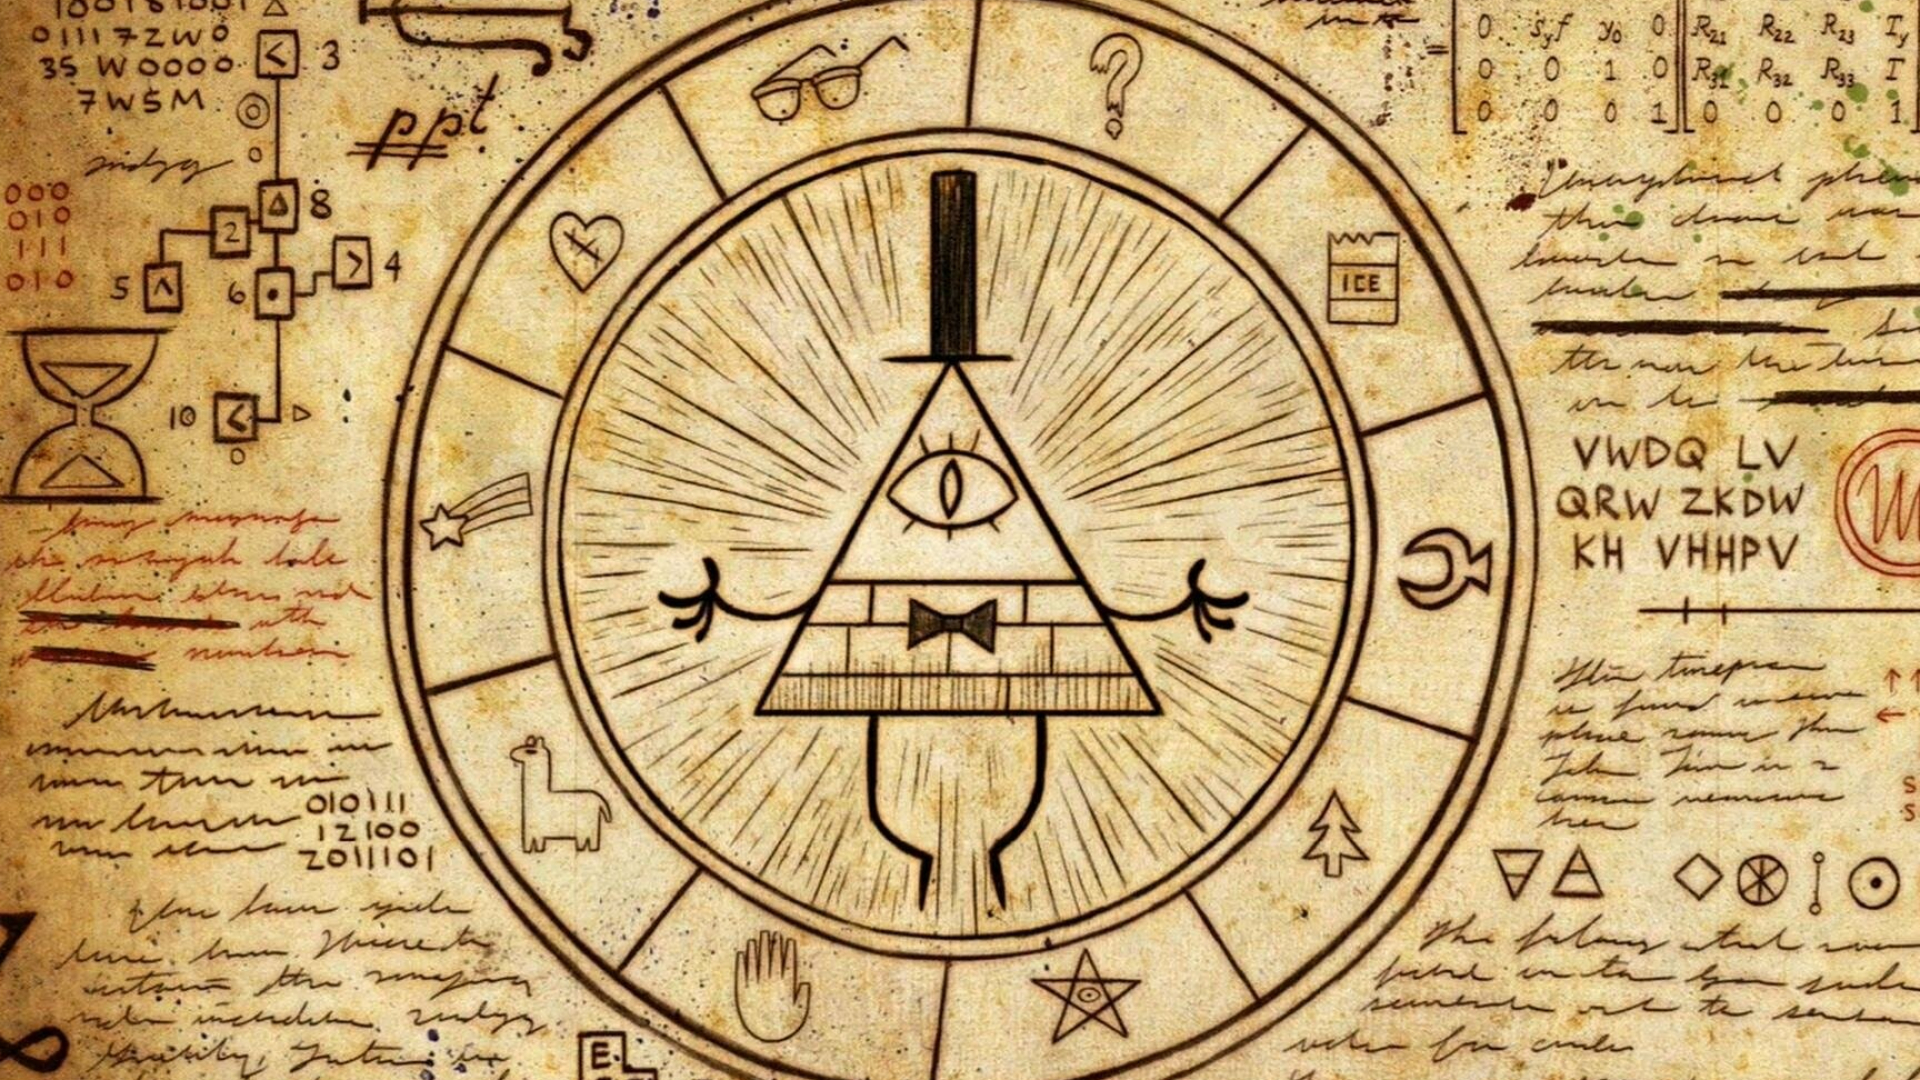 Gravity Falls: Bill Cipher, debuted in the episode "Dreamscaperers". 1920x1080 Full HD Wallpaper.